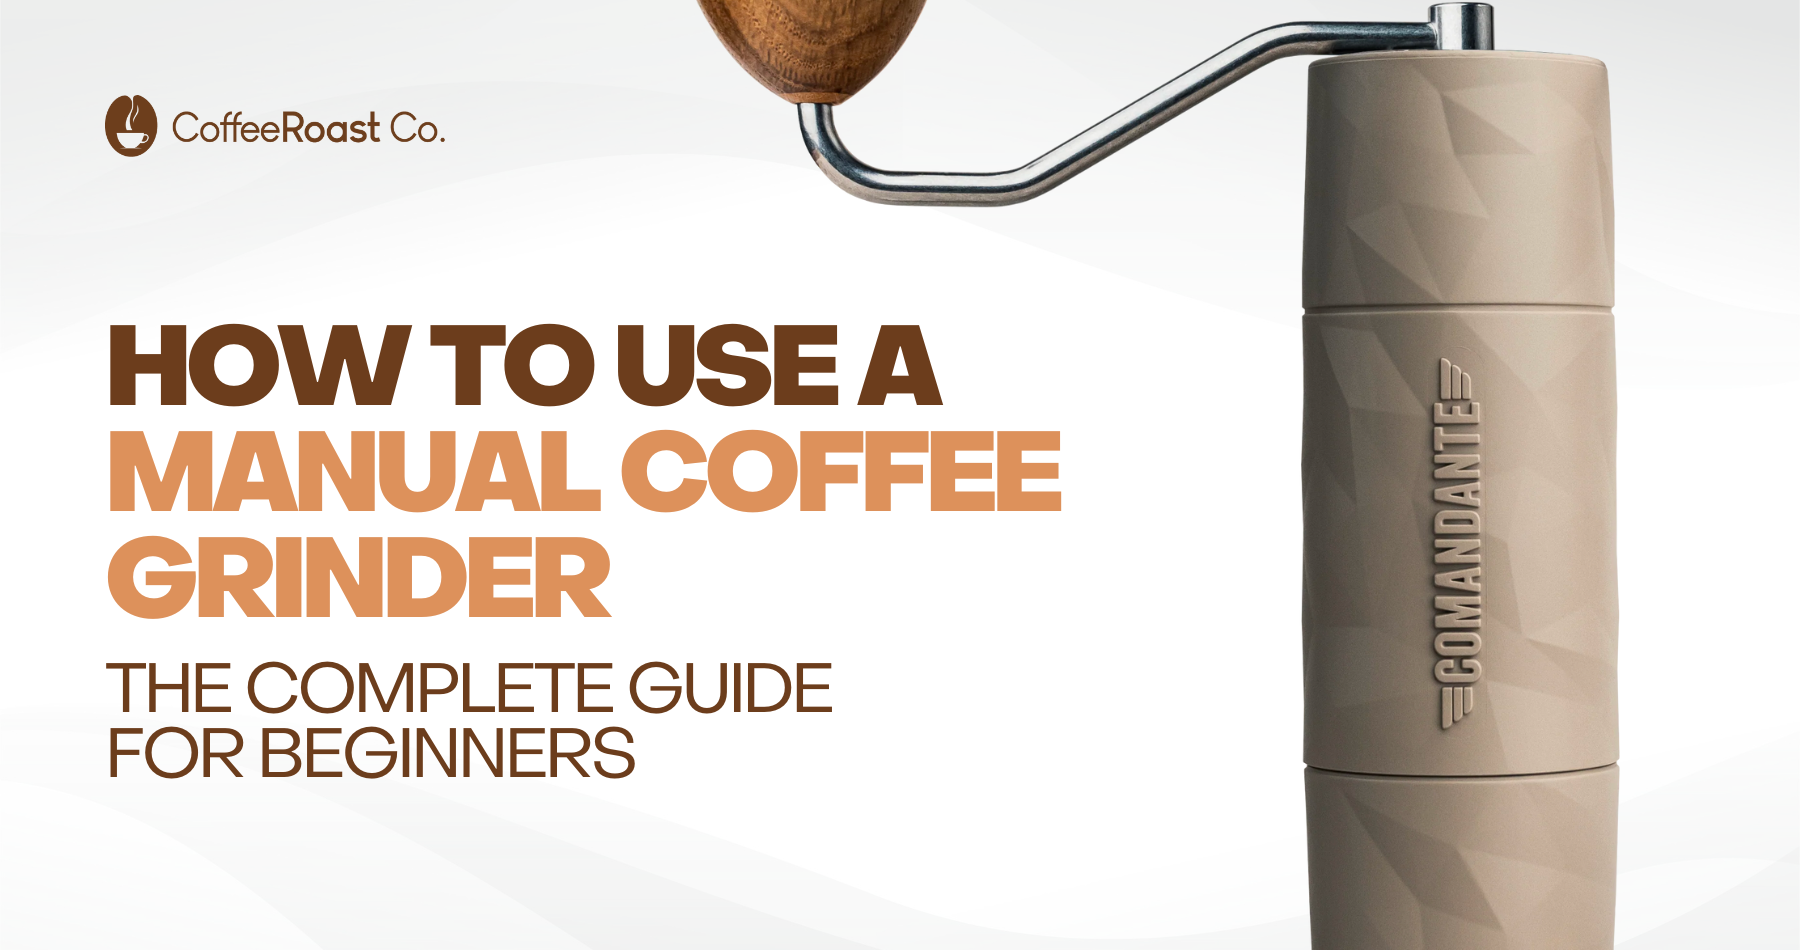 How to use a Manual Coffee Grinder: The Complete Guide for Beginners!